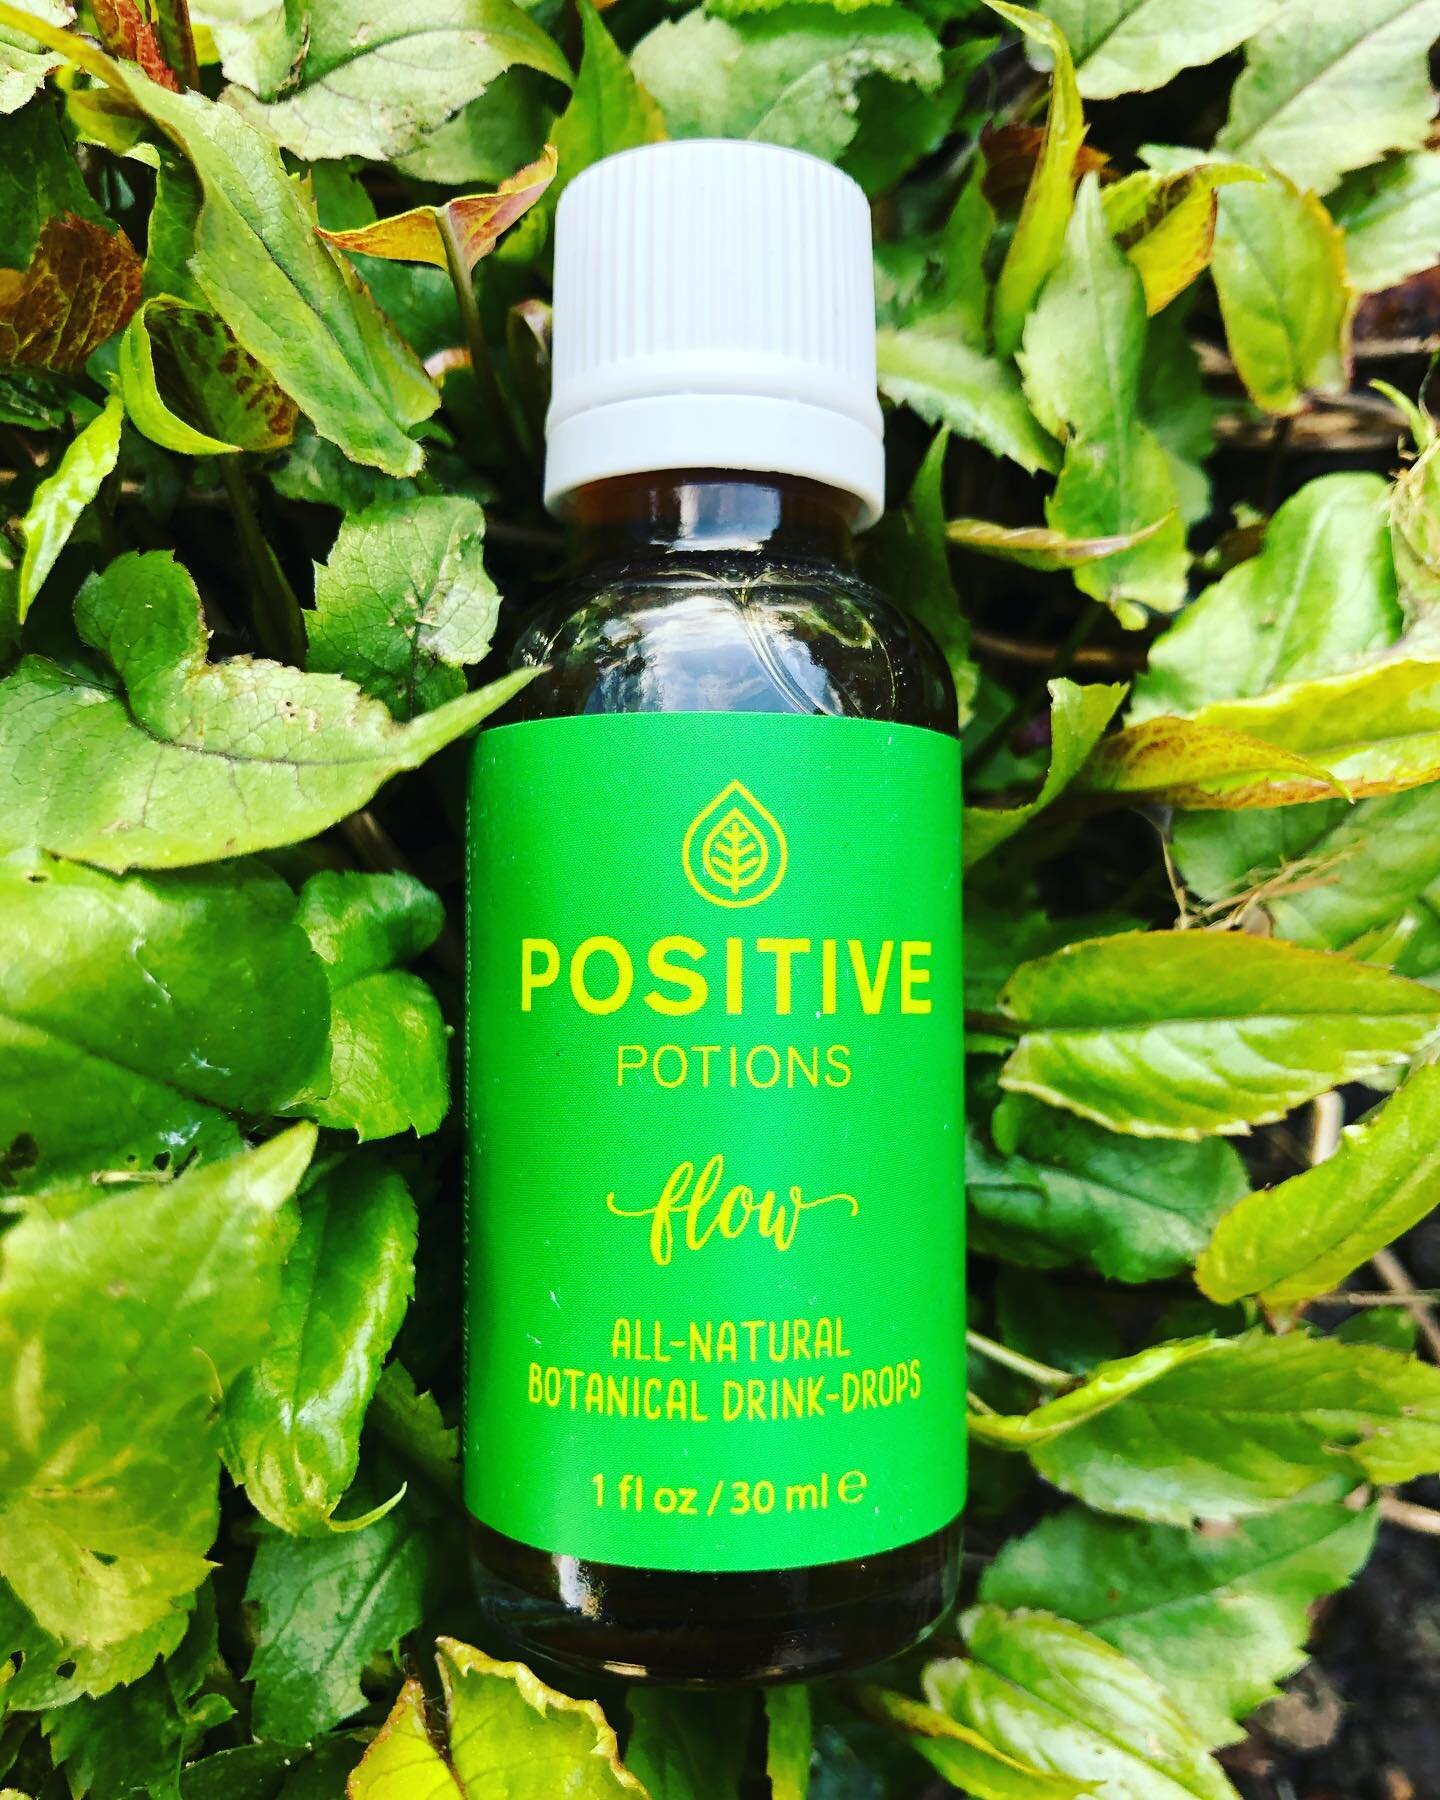 Find your #flow state and raise a #botanical glass to all those multi-tasking #womensupportingwomen this #internationalwomensday 💪☀️💖 #jointheherbalrevolution #powertotheplants #thepowerofpositivedrinking #nosugar #noalcohol #womenempowerment #wome